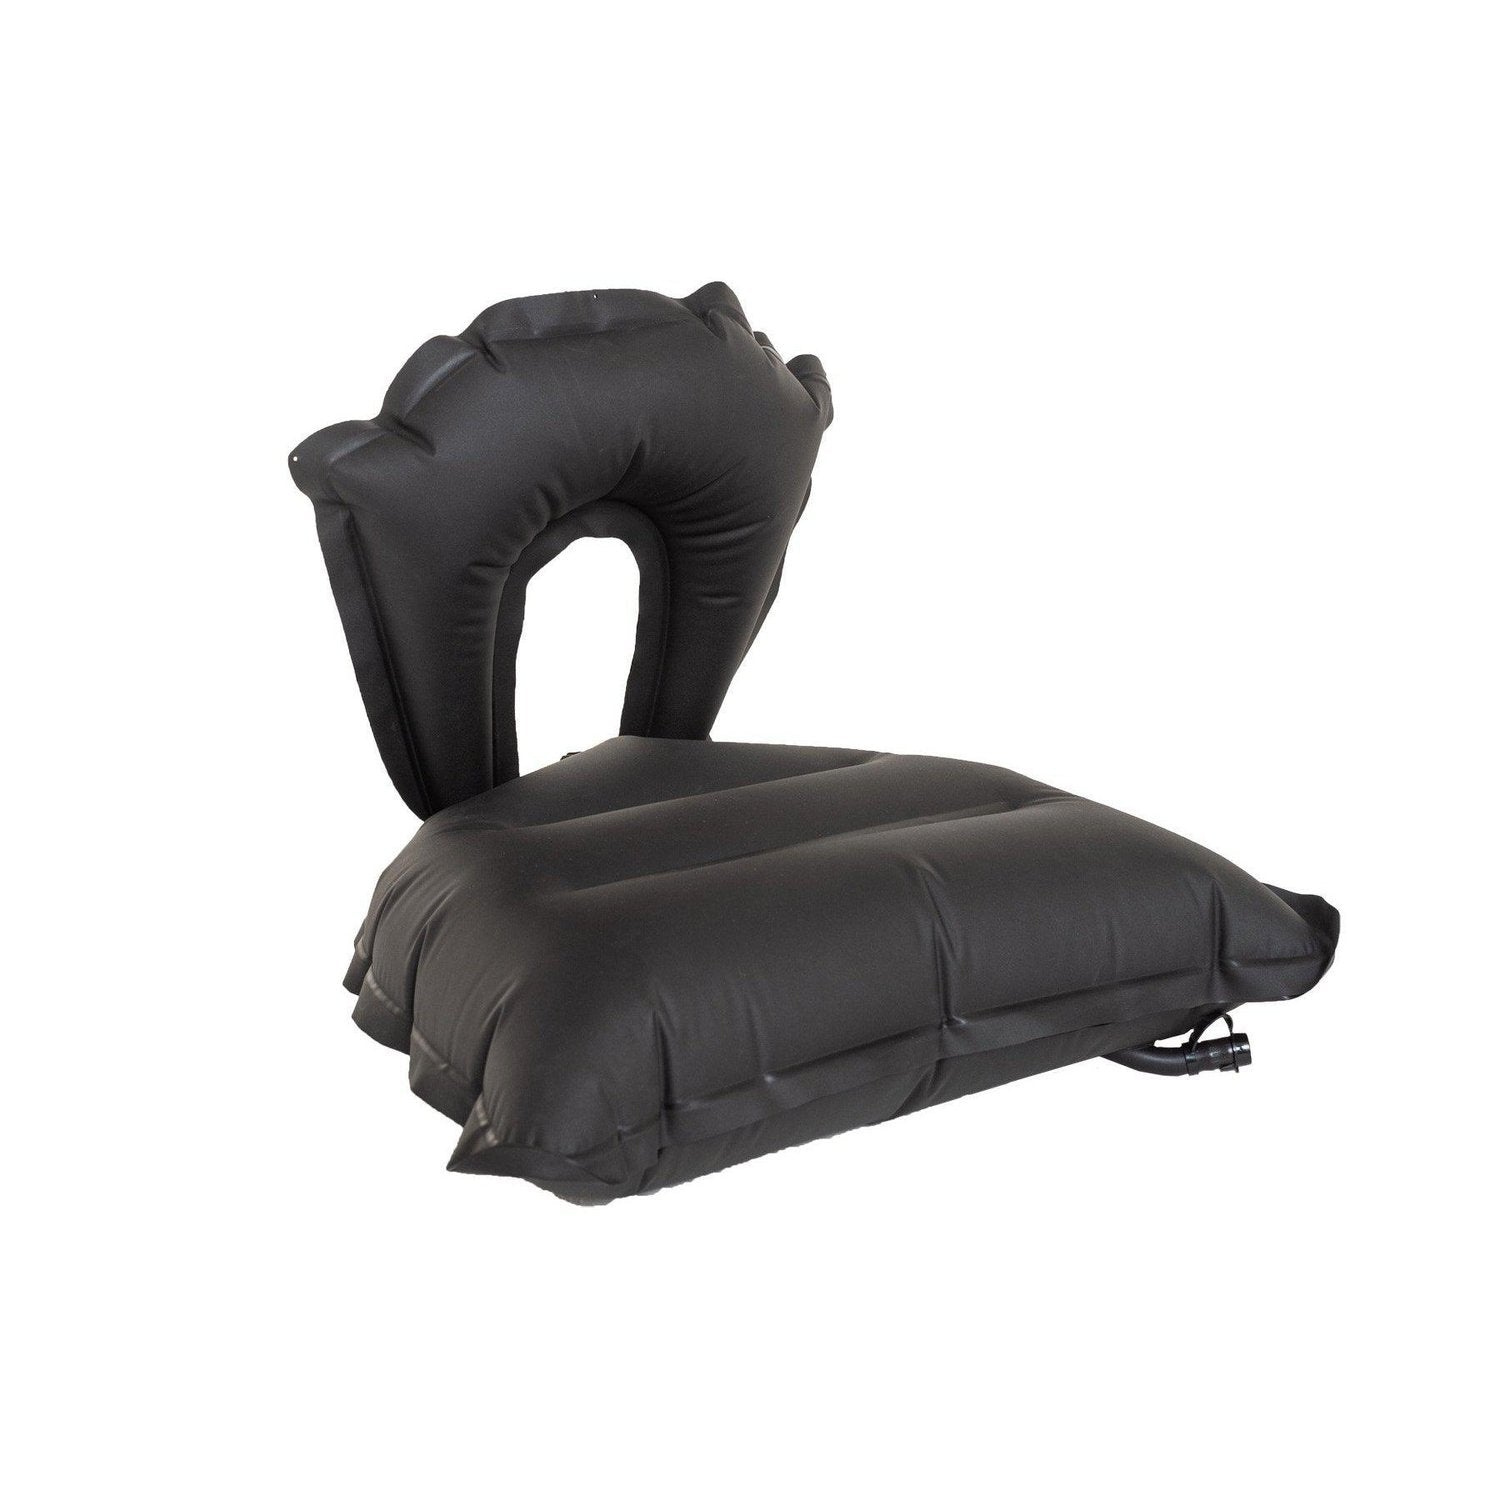 Anfibio Wideseat with backrest-Packraft Norge